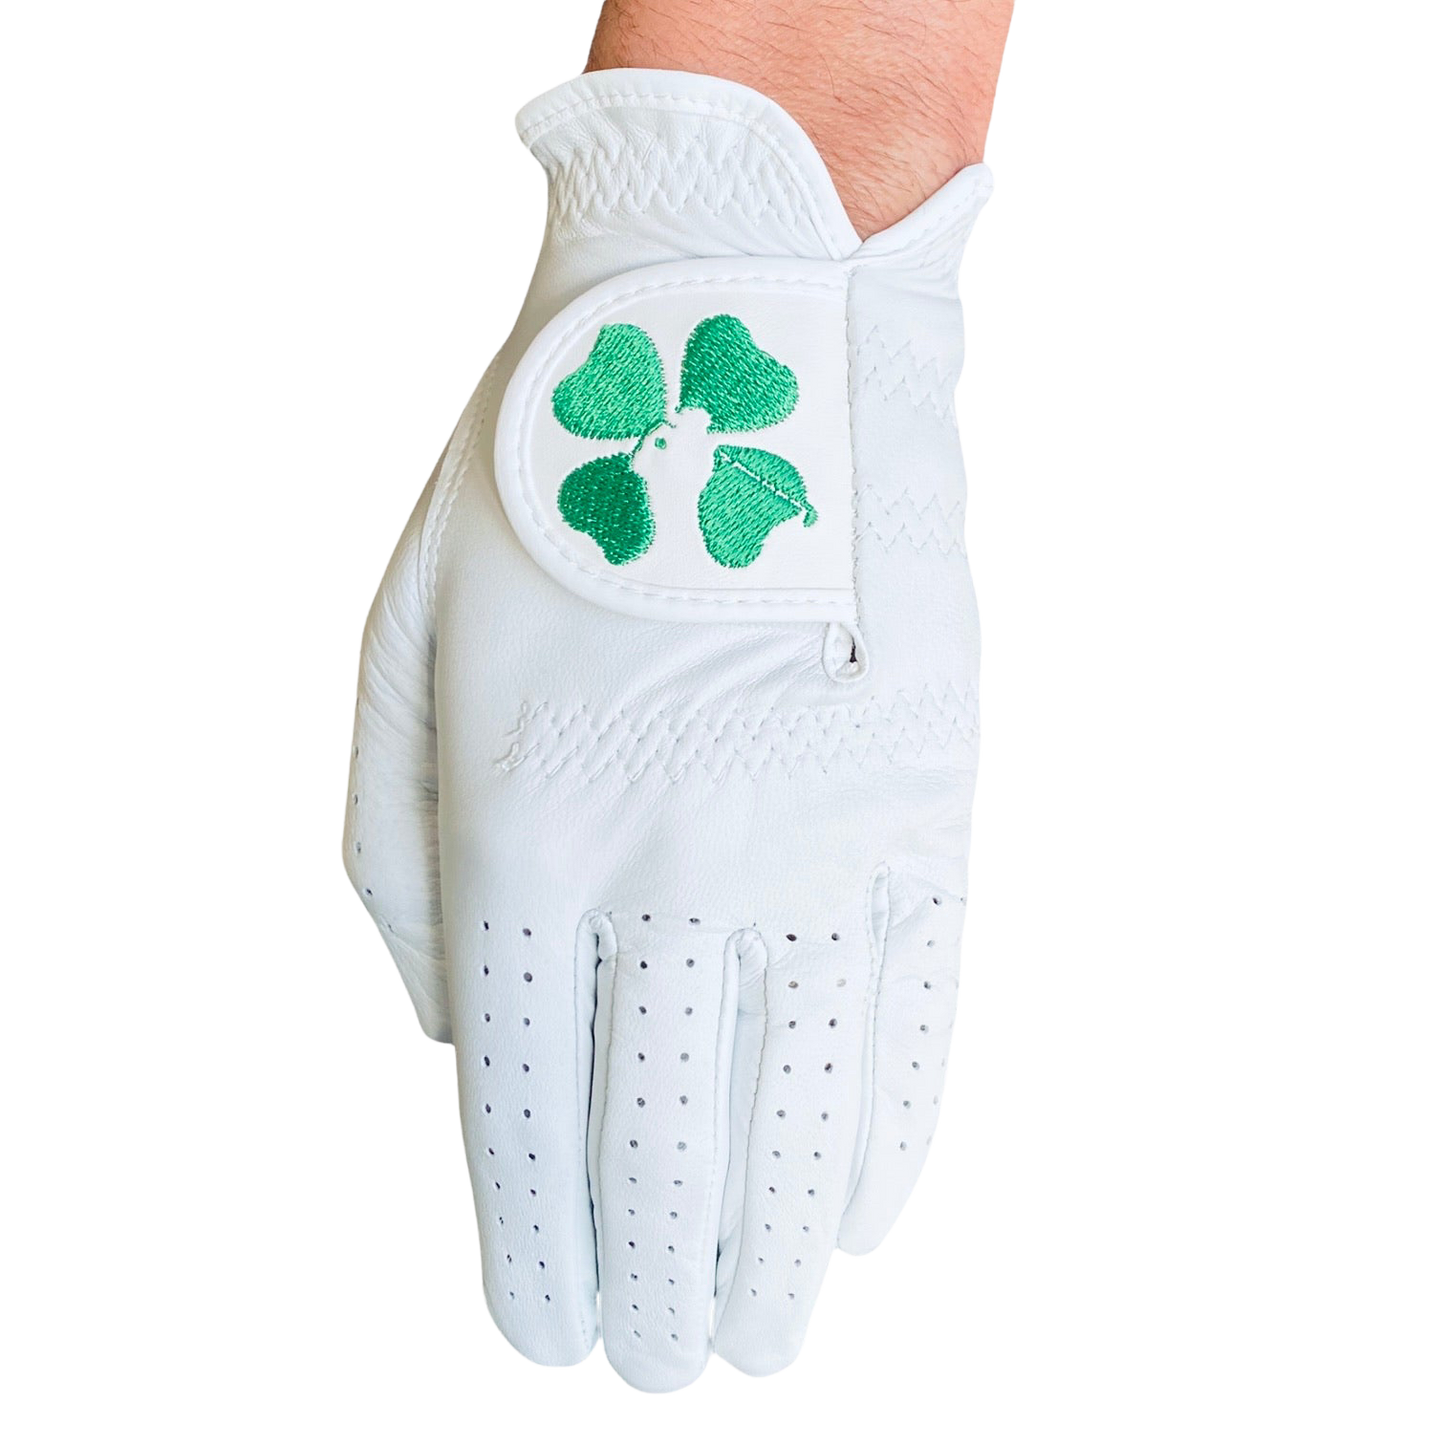 Classic Tour Glove - Embroidered